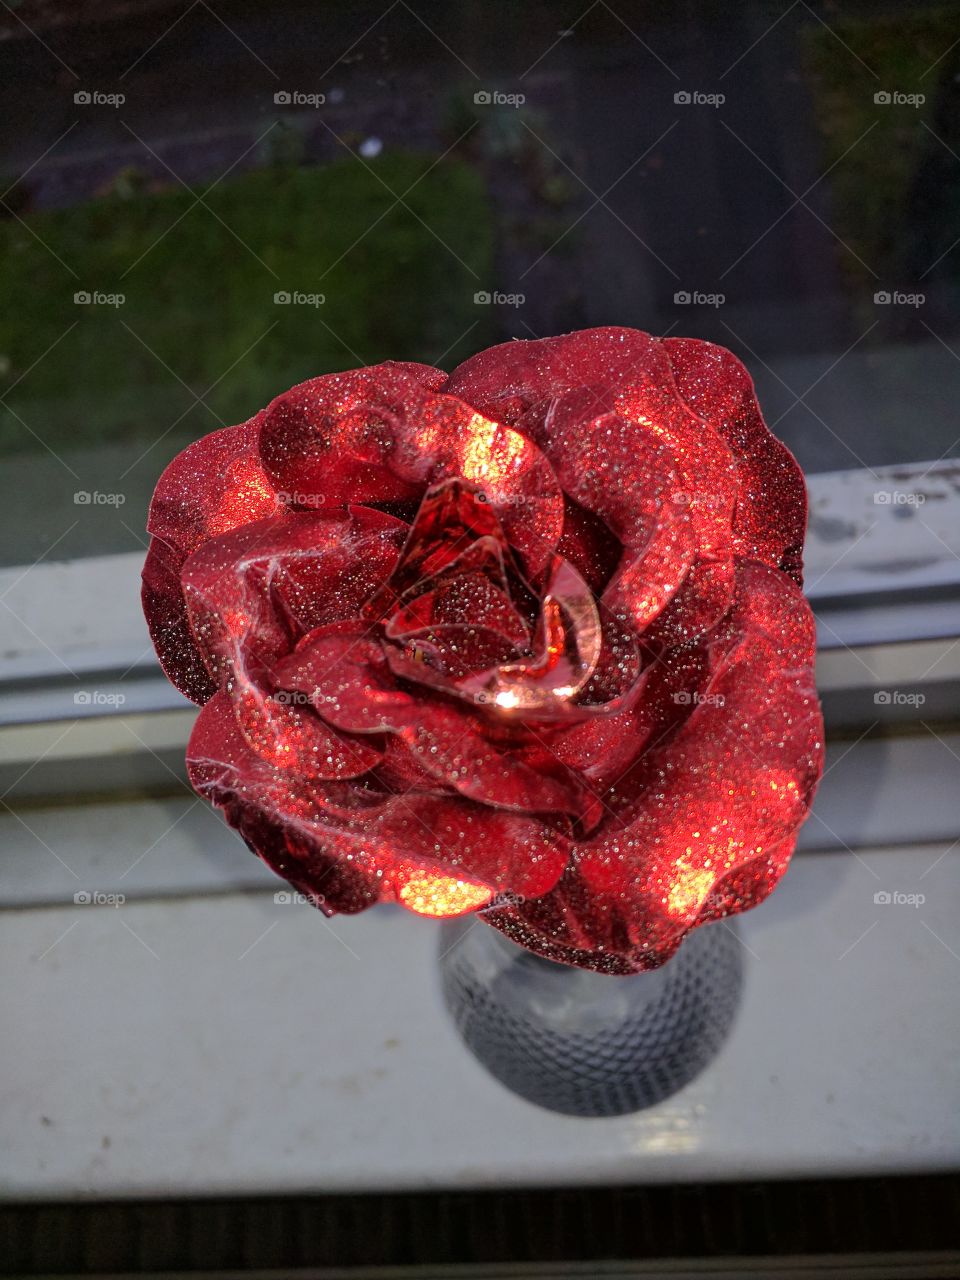 A rose that I made